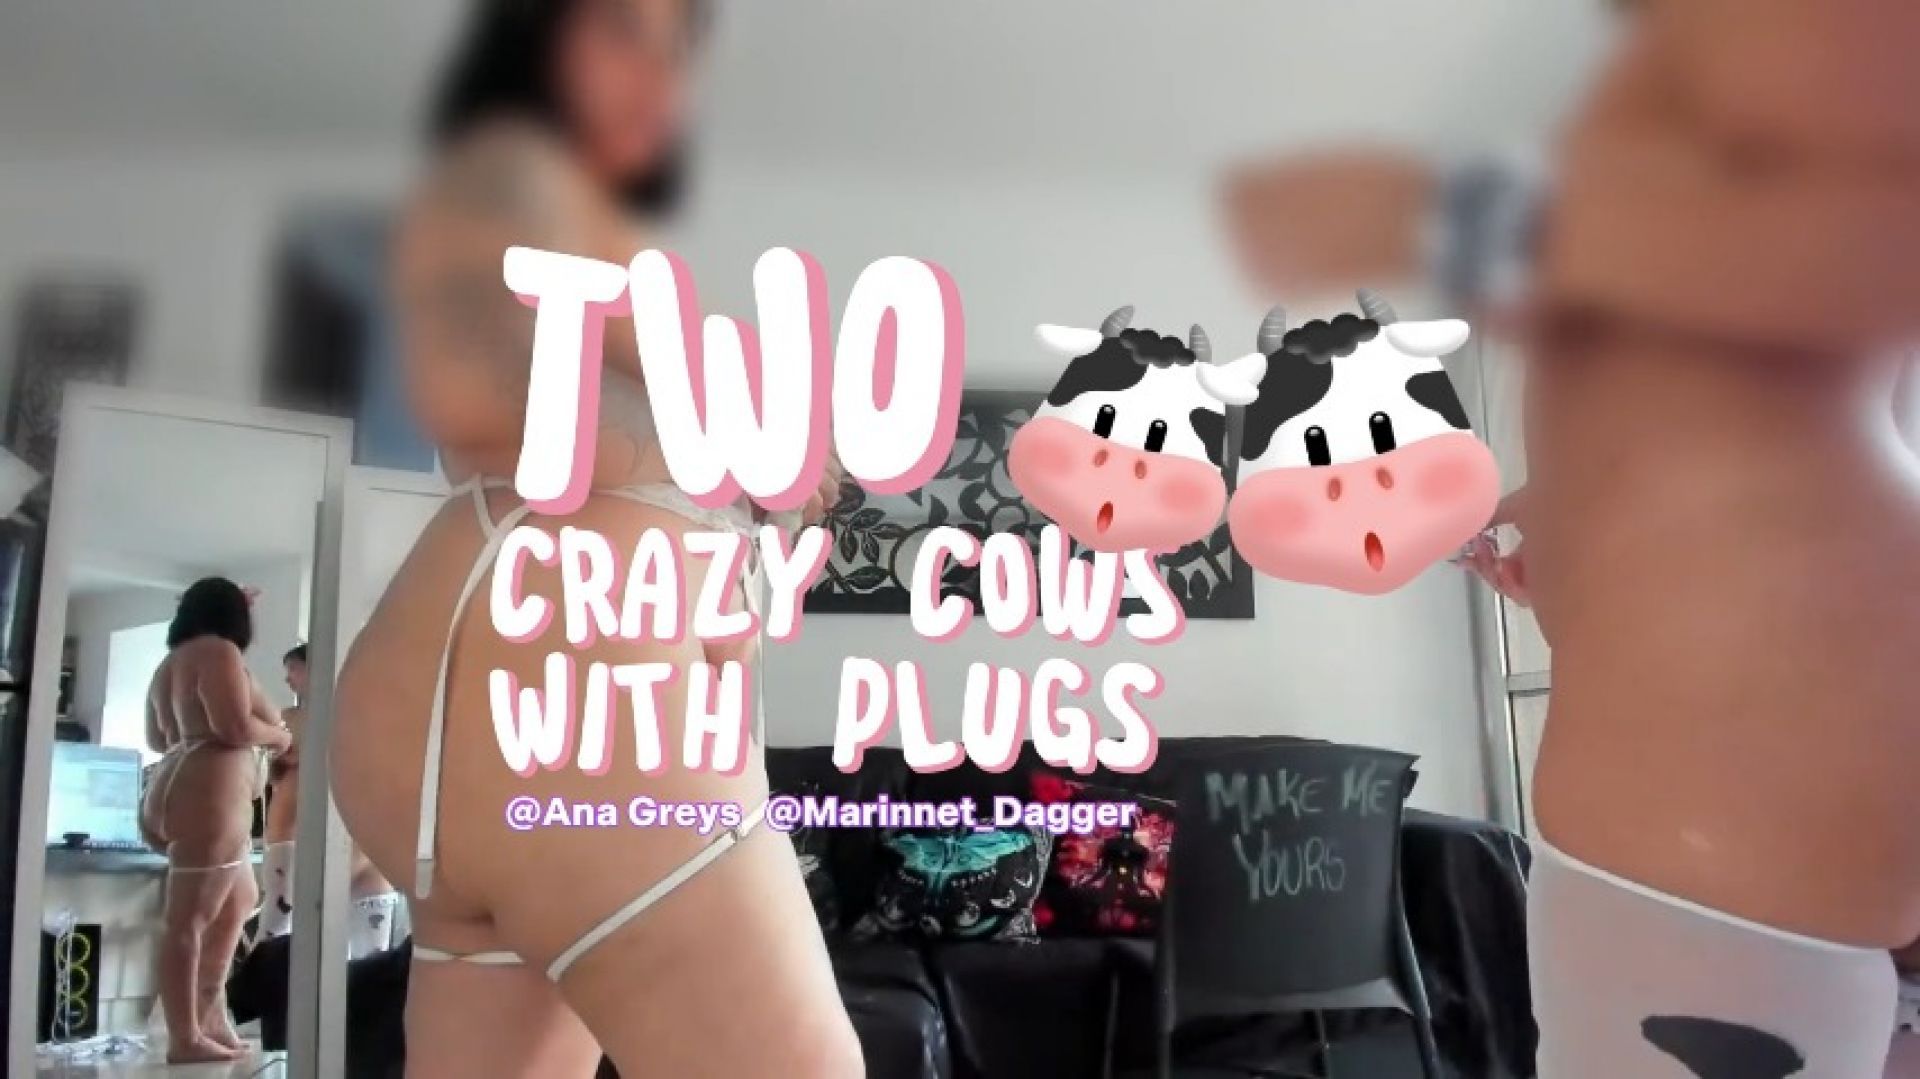 TWO CRAZY FRIENDS: Two crazy cows with plugs